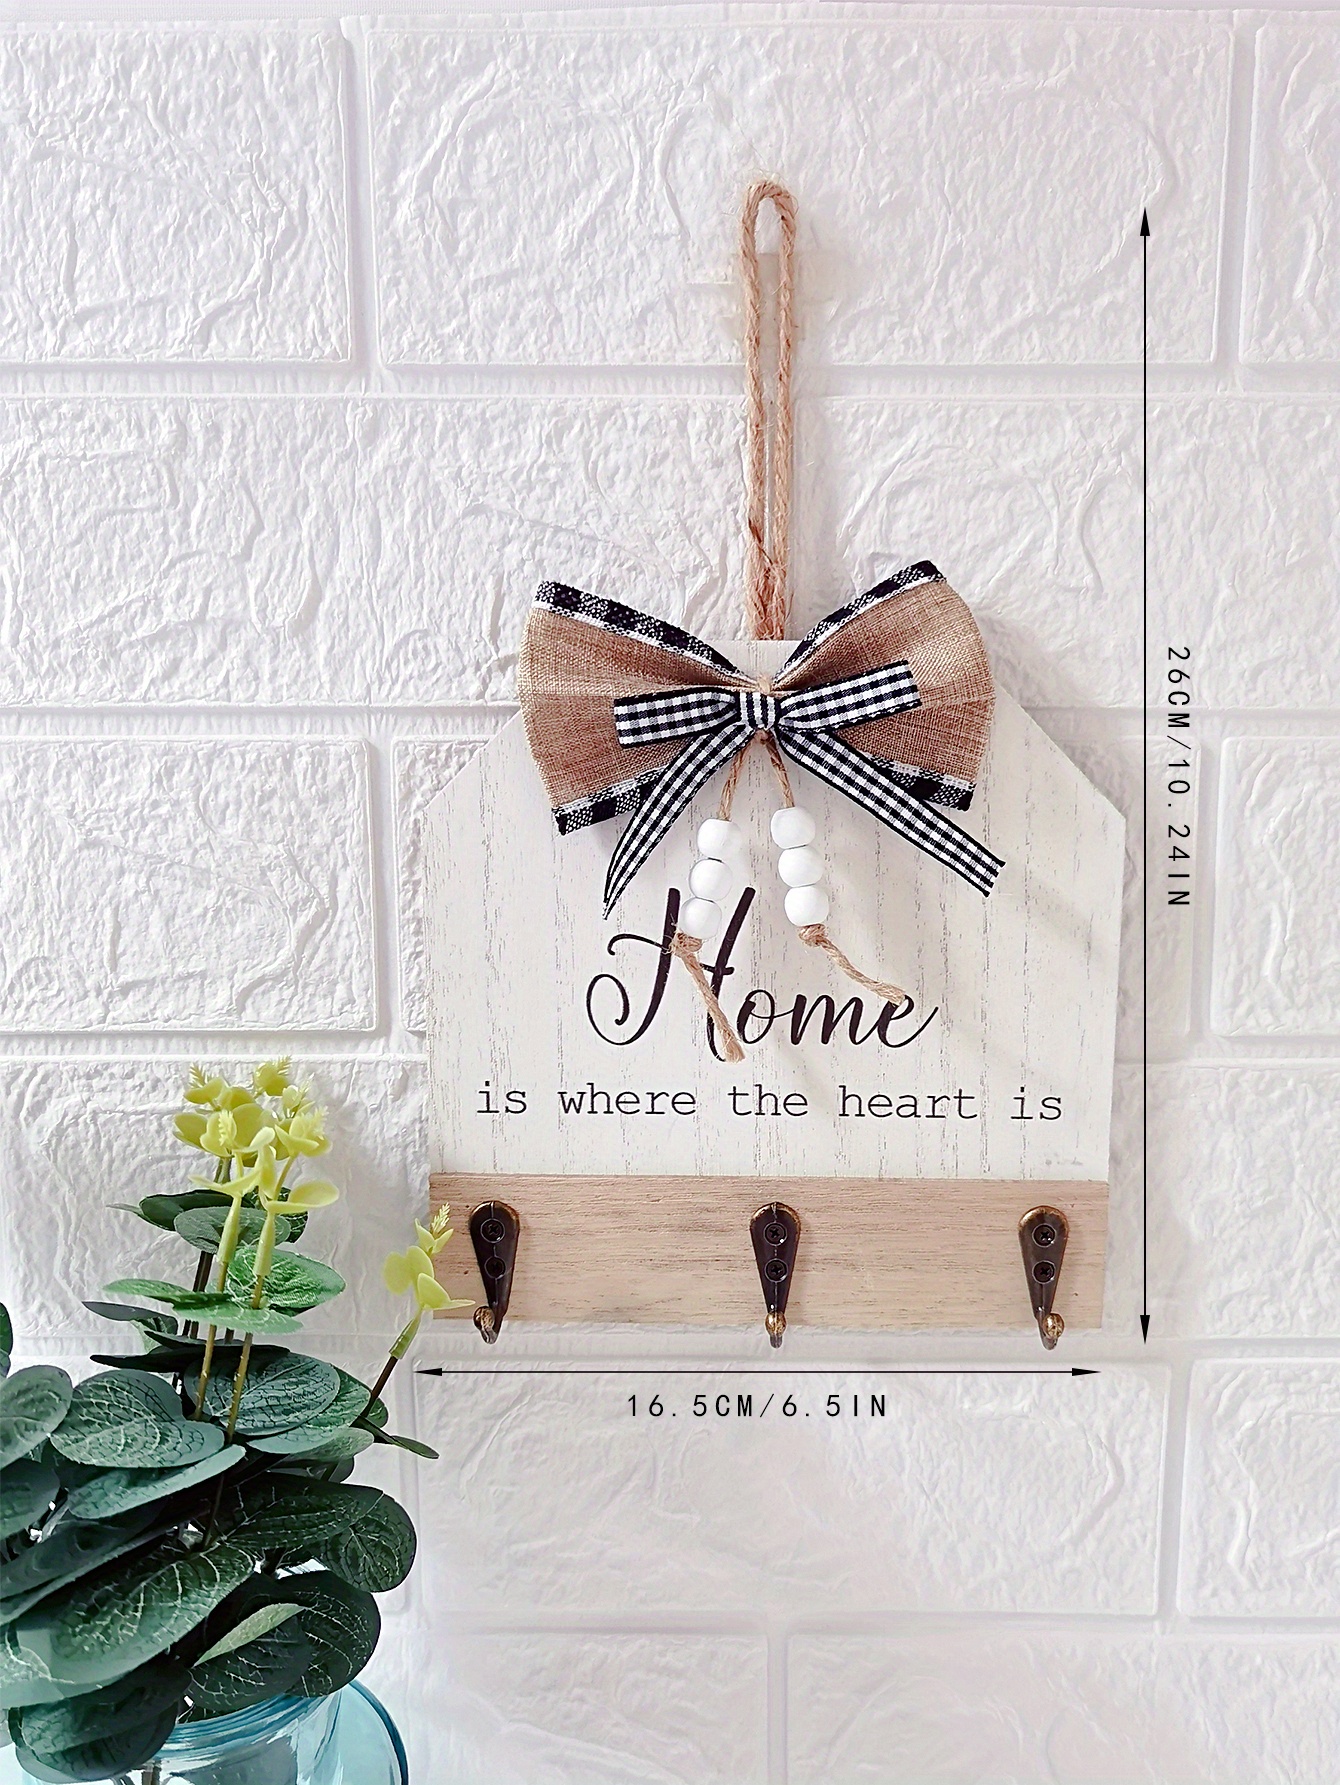 Rustic Wood Home Sign Decor with Hooks, Decorative Hanging Wooden